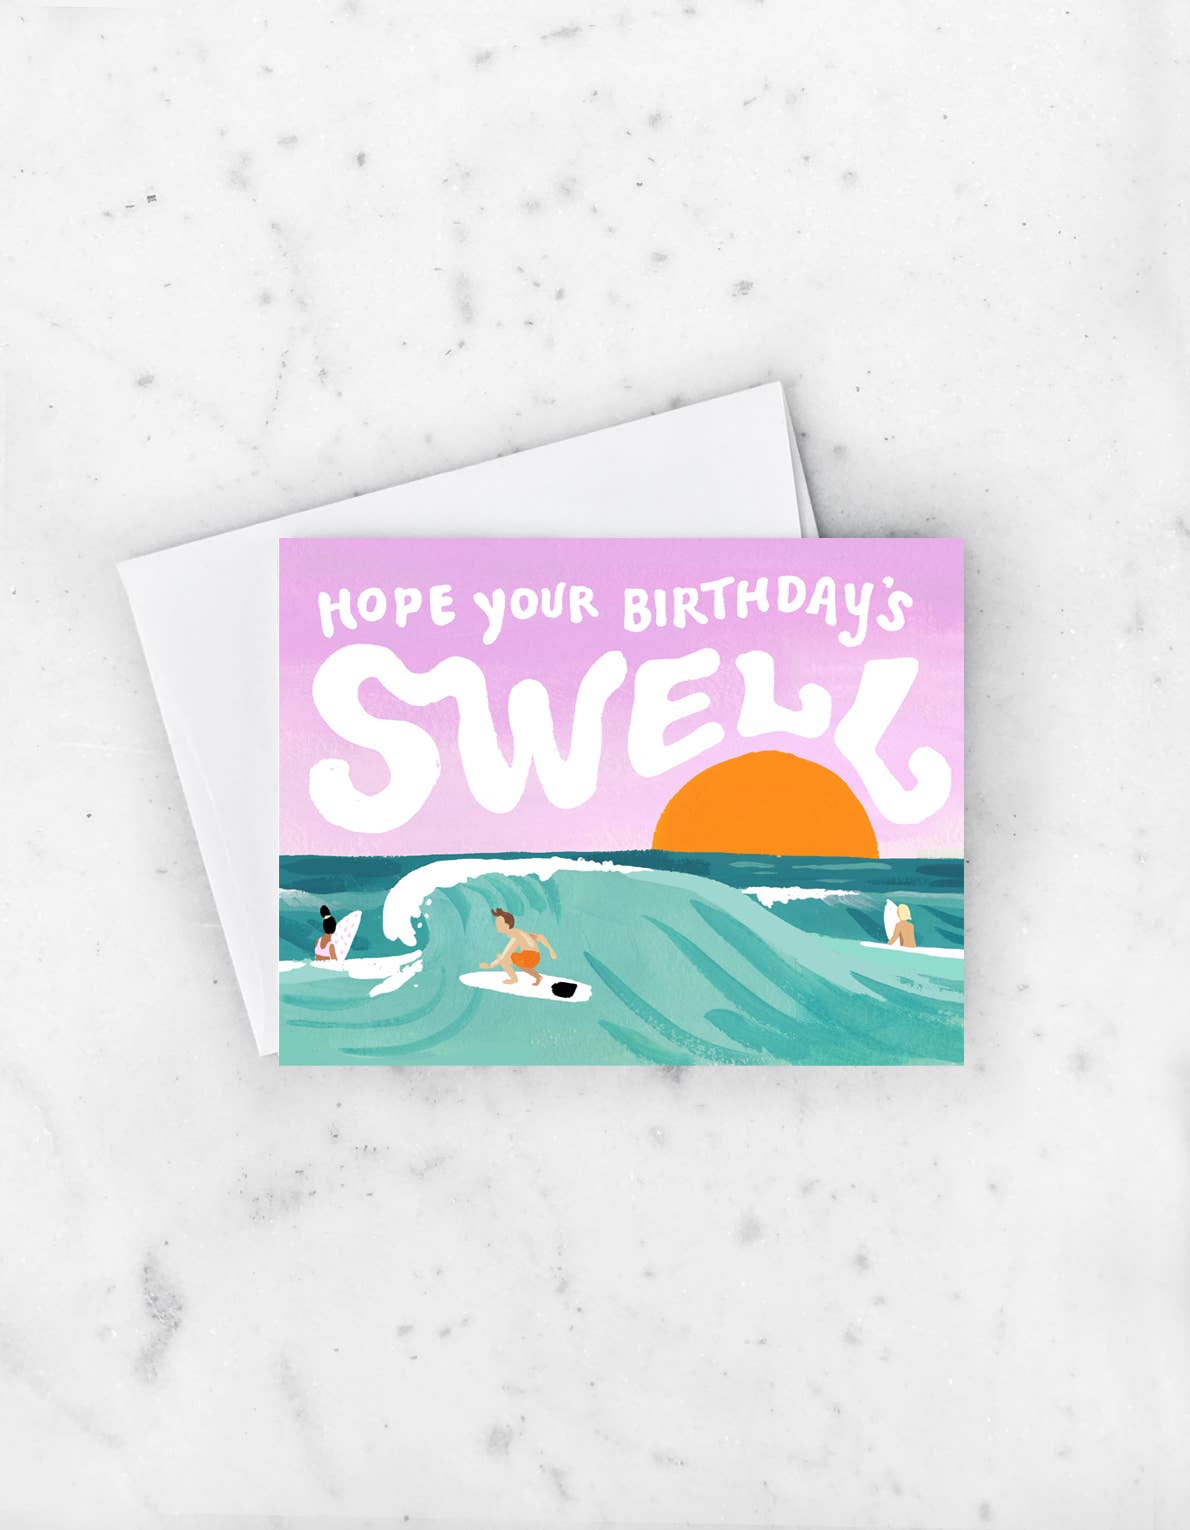 Hope your Birthday's Swell surfing sunset card by Idlewild